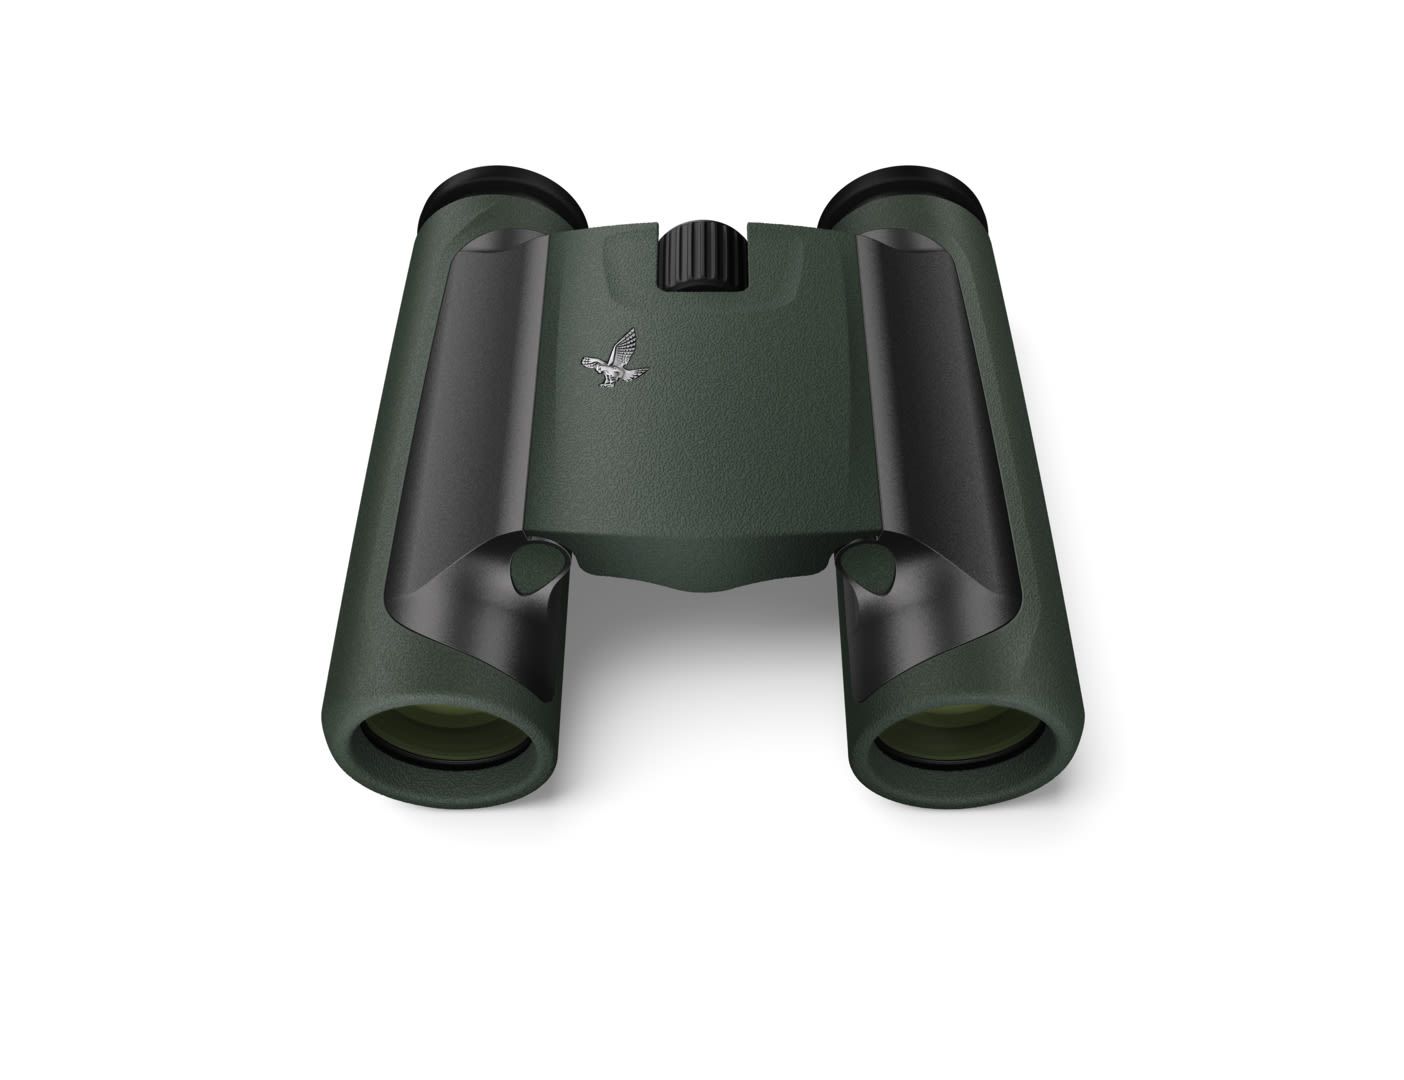 Swarovski CL 8x25 Pocket Binoculars Green with Wild Nature Accessory Pack - High resolution closeup of the binoculars with a top down perspective